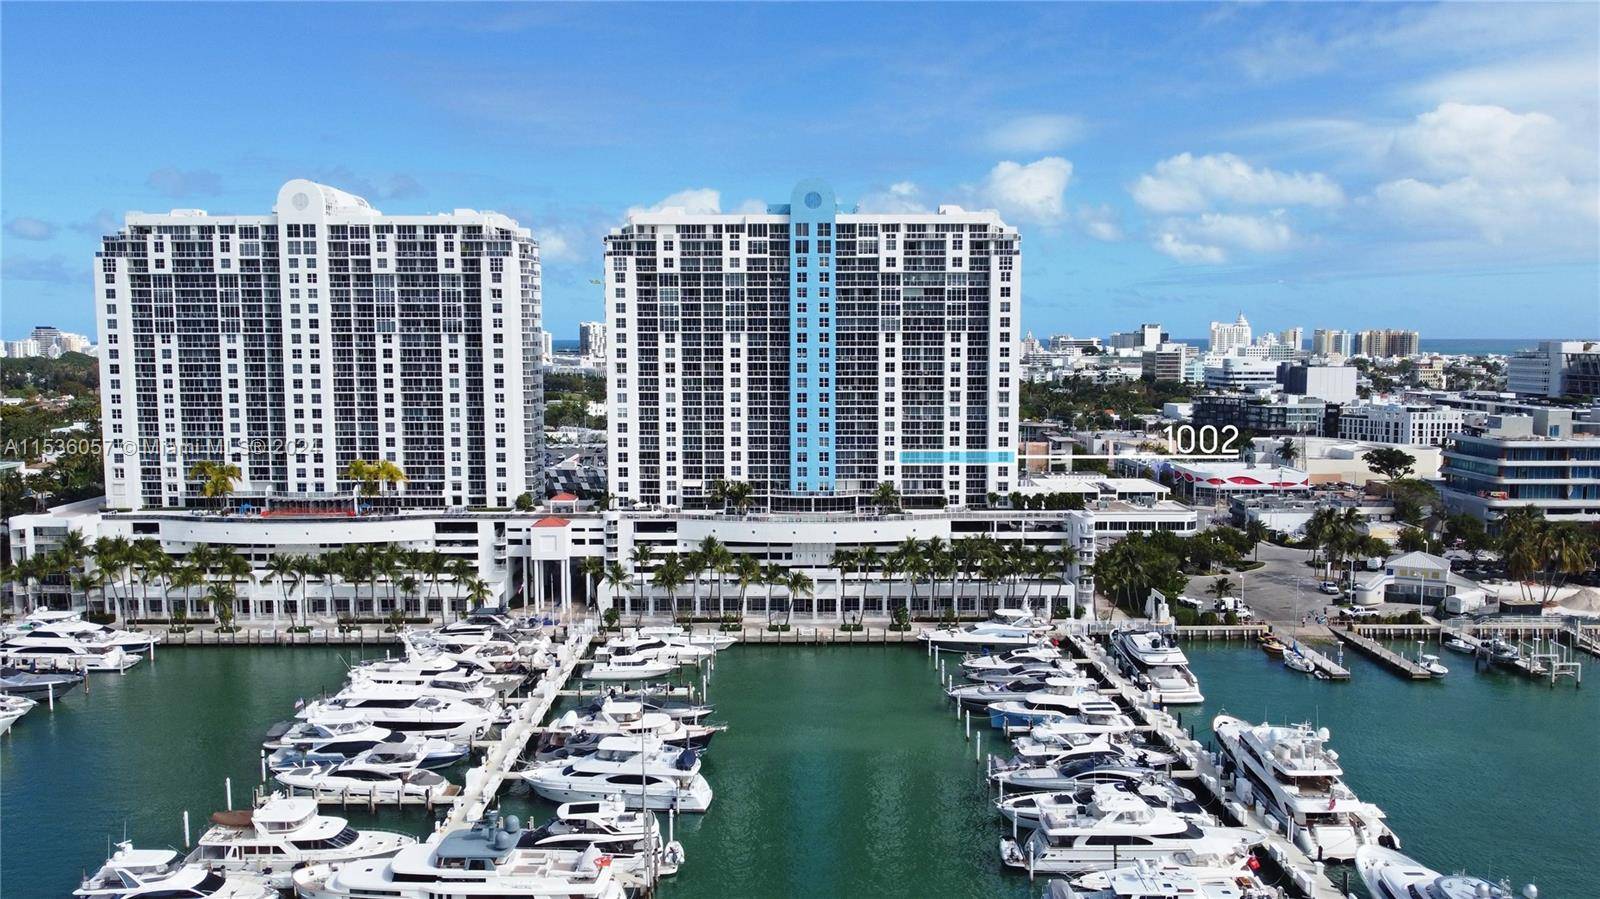 Rare 4 bedroom, 3. 5 bathroom marina home at Sunset Harbour.